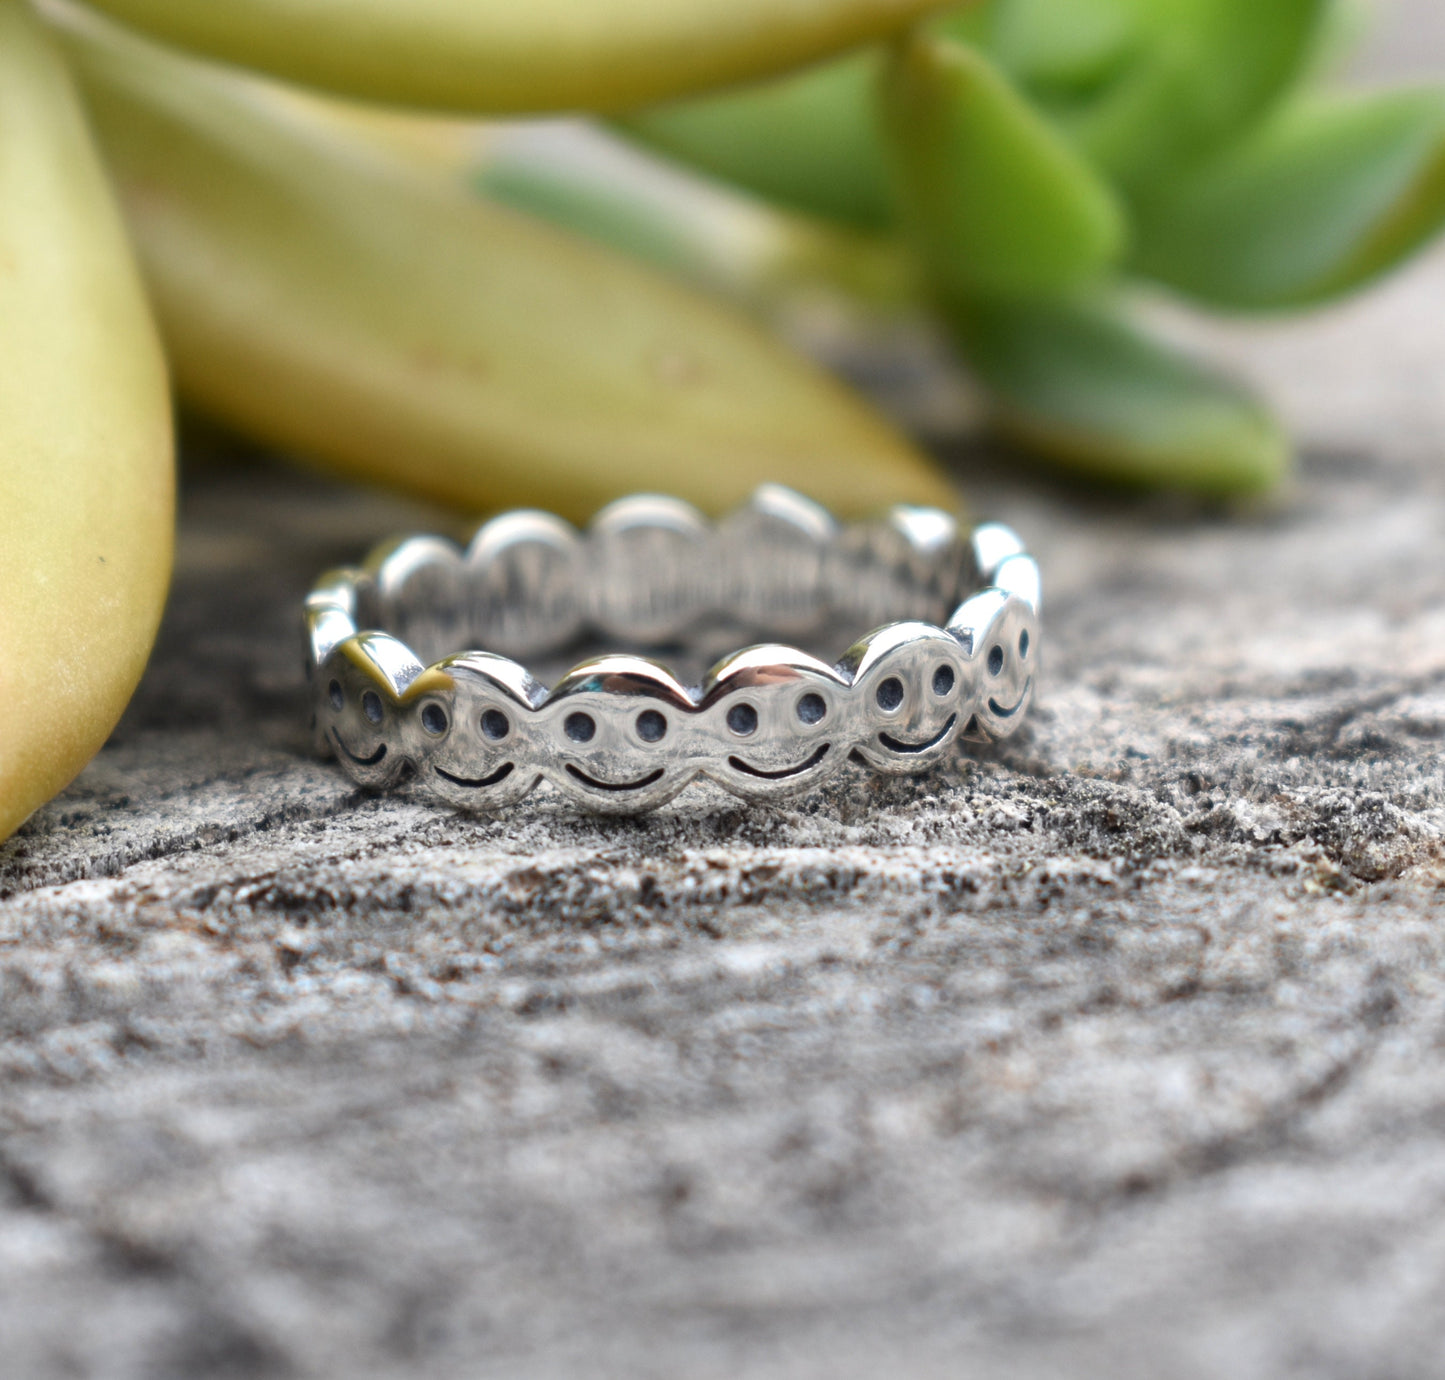 Smiley Face Ring- Emoji Ring, Happy Face Ring, Y2k Ring- Silver Happy Face